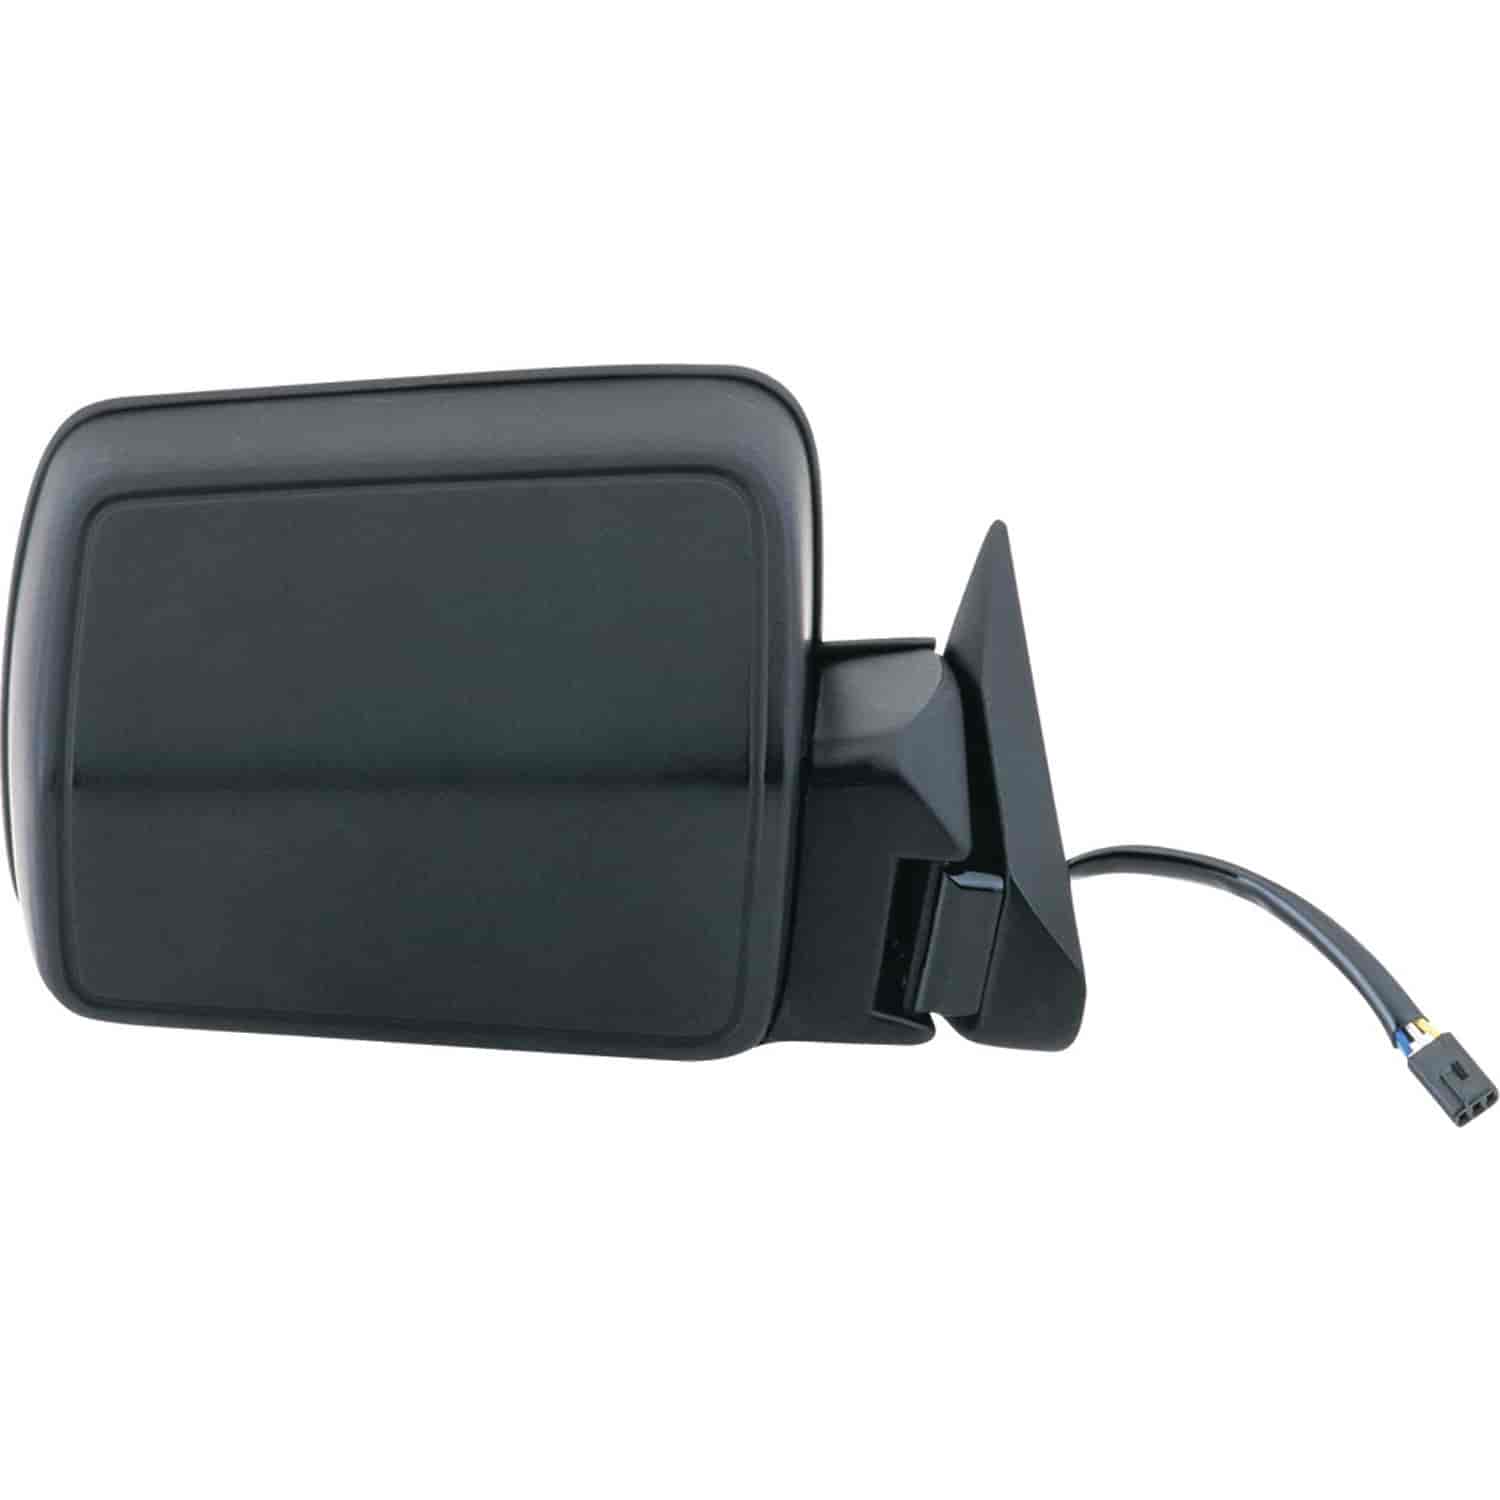 OEM Style Replacement mirror for 84-96 JEEP Cherokee/ Wagoneer passenger side mirror tested to fit a